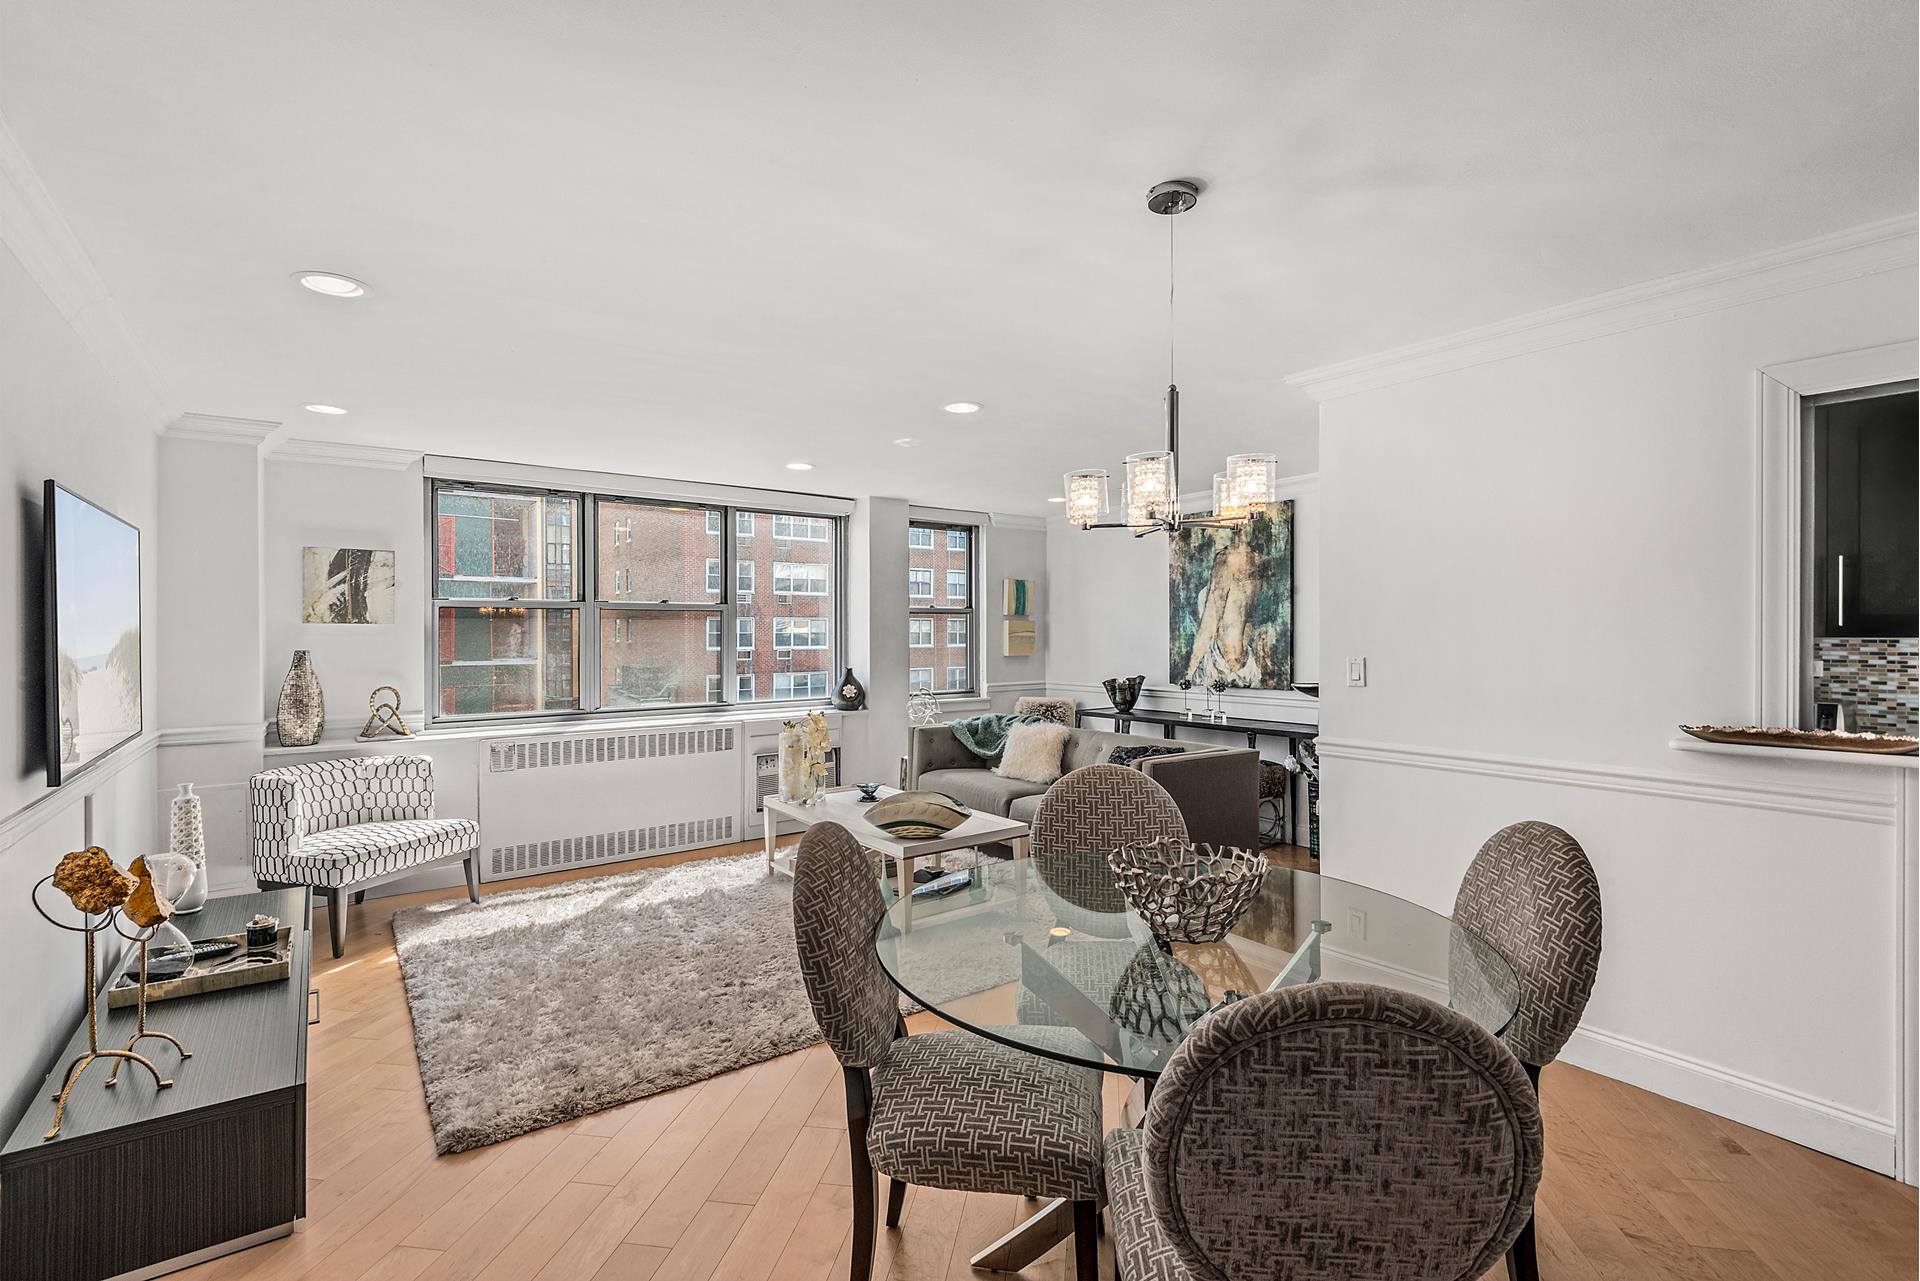 32 Gramercy Park 9J, Gramercy Park, Downtown, NYC - 1 Bedrooms  
1 Bathrooms  
3 Rooms - 